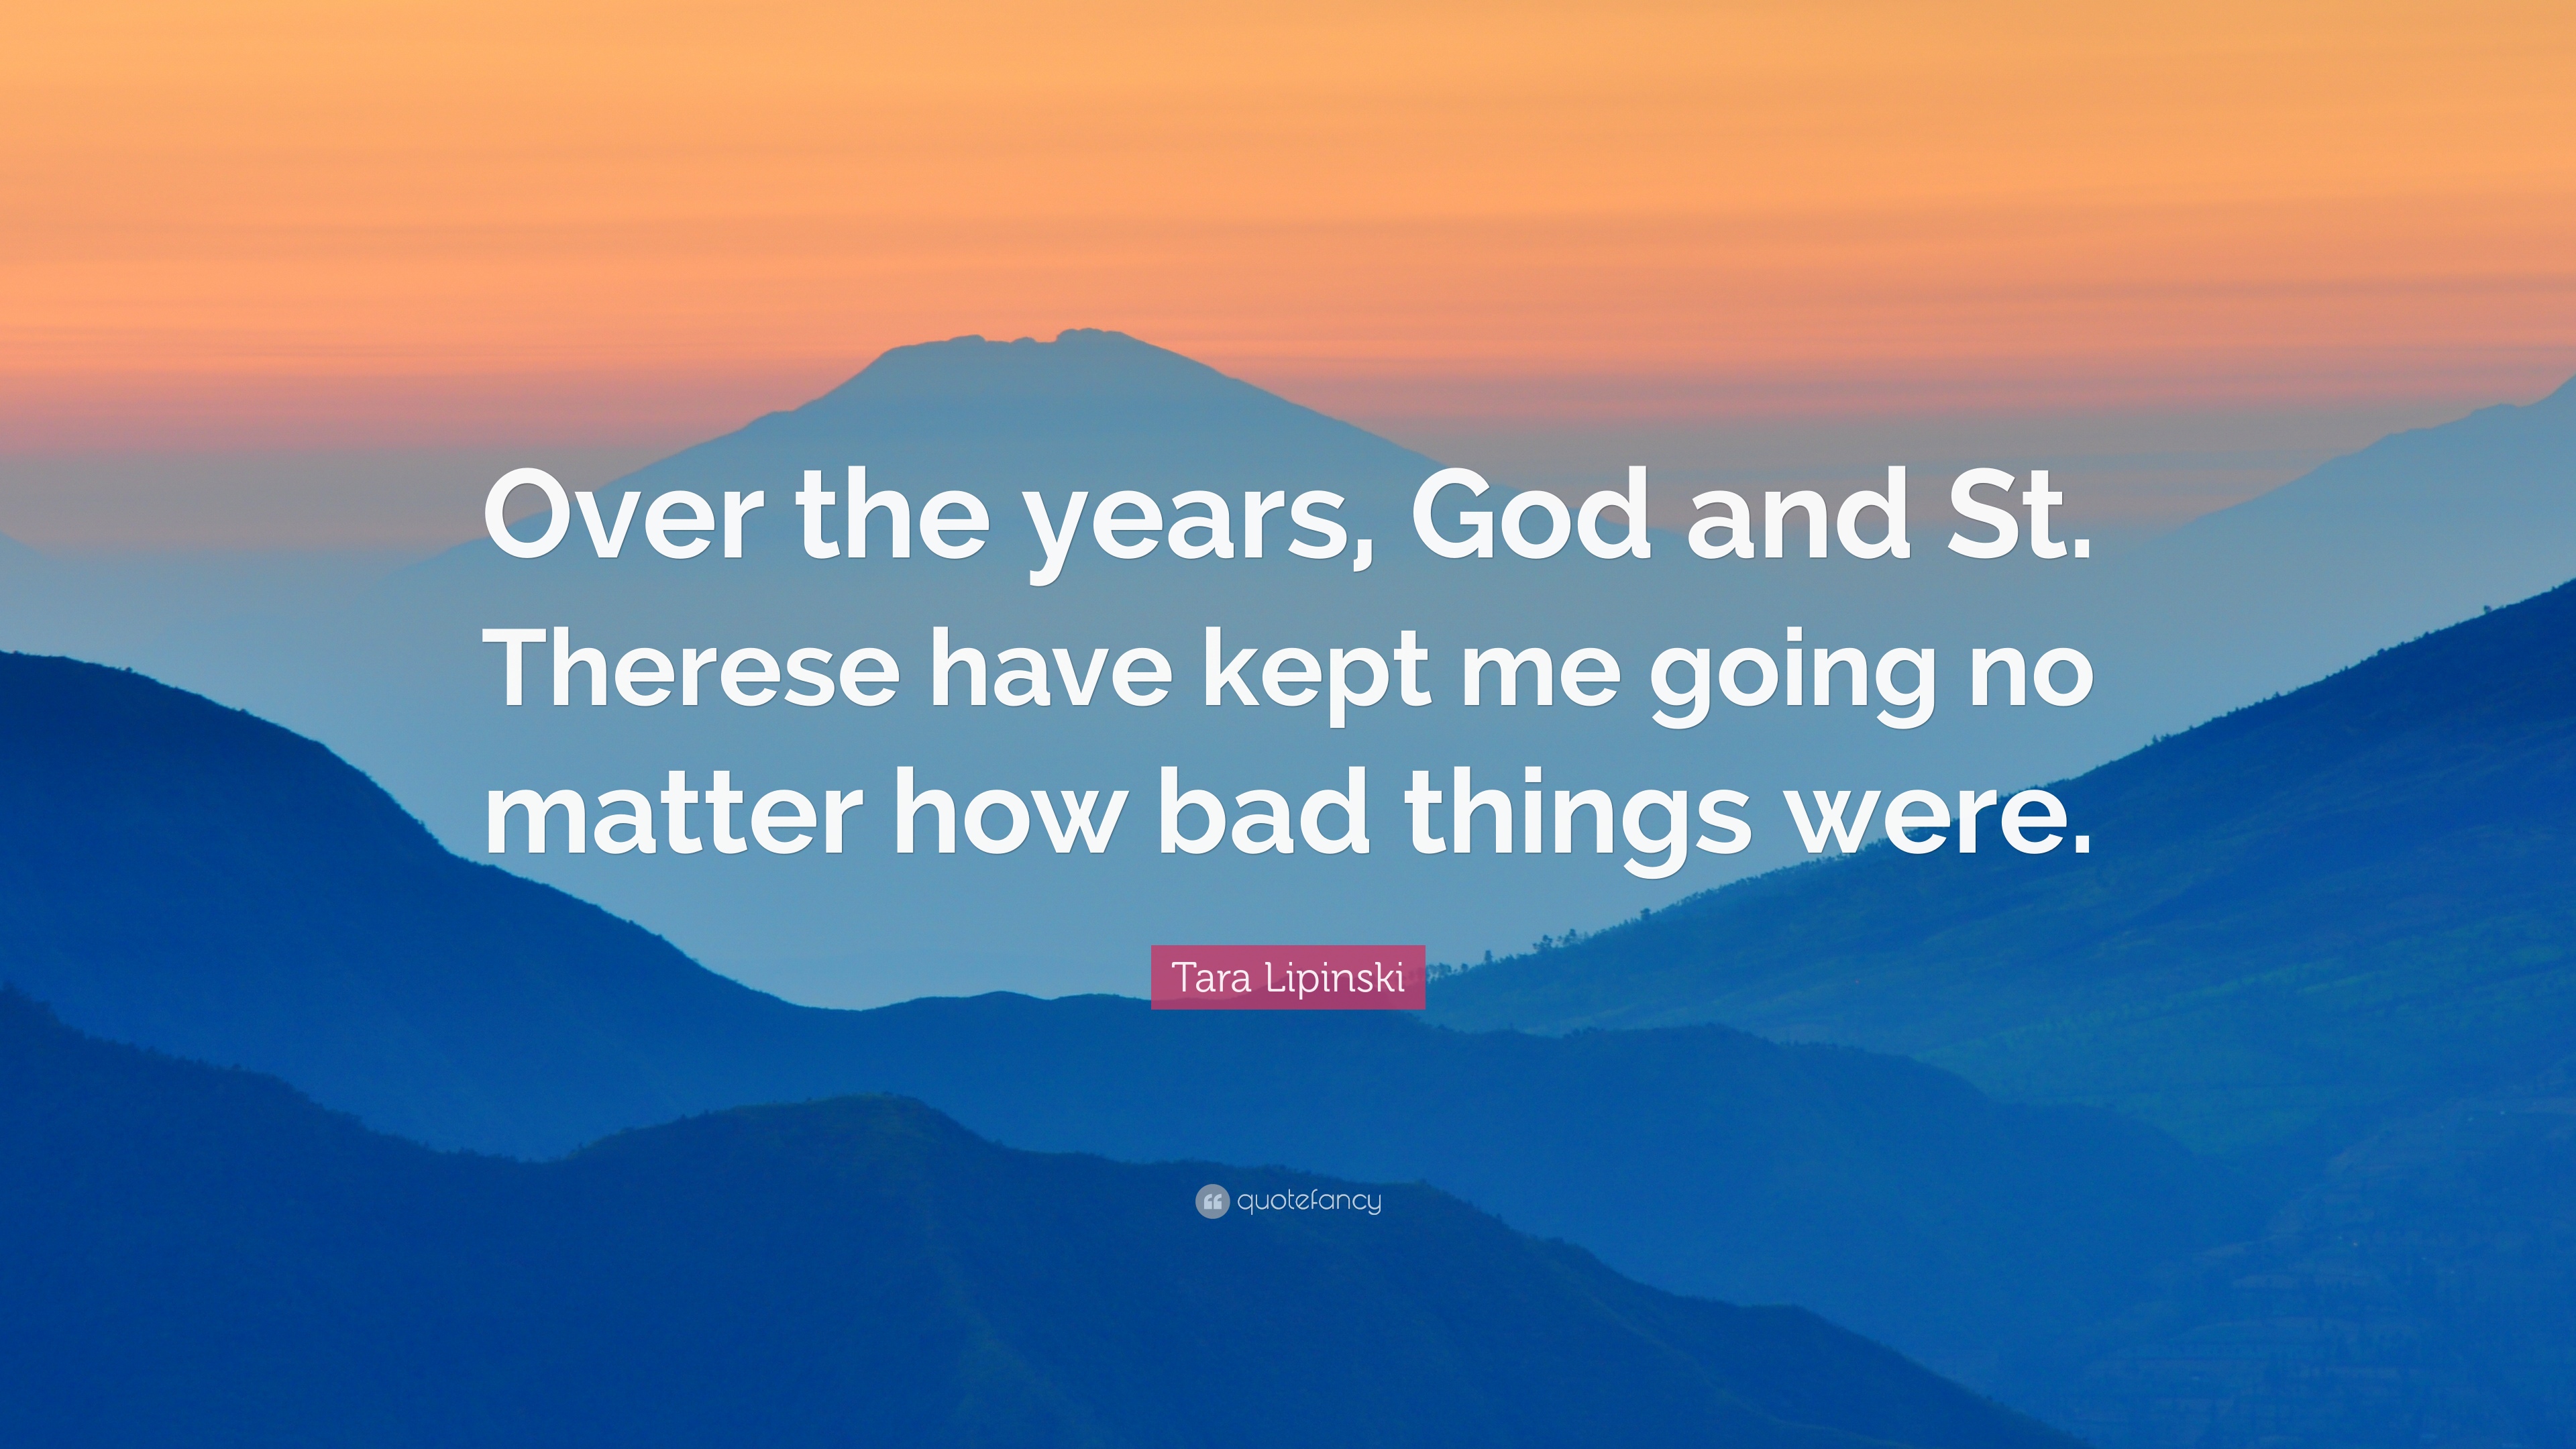 Tara Lipinski Quote: “Over the years, God and St. Therese